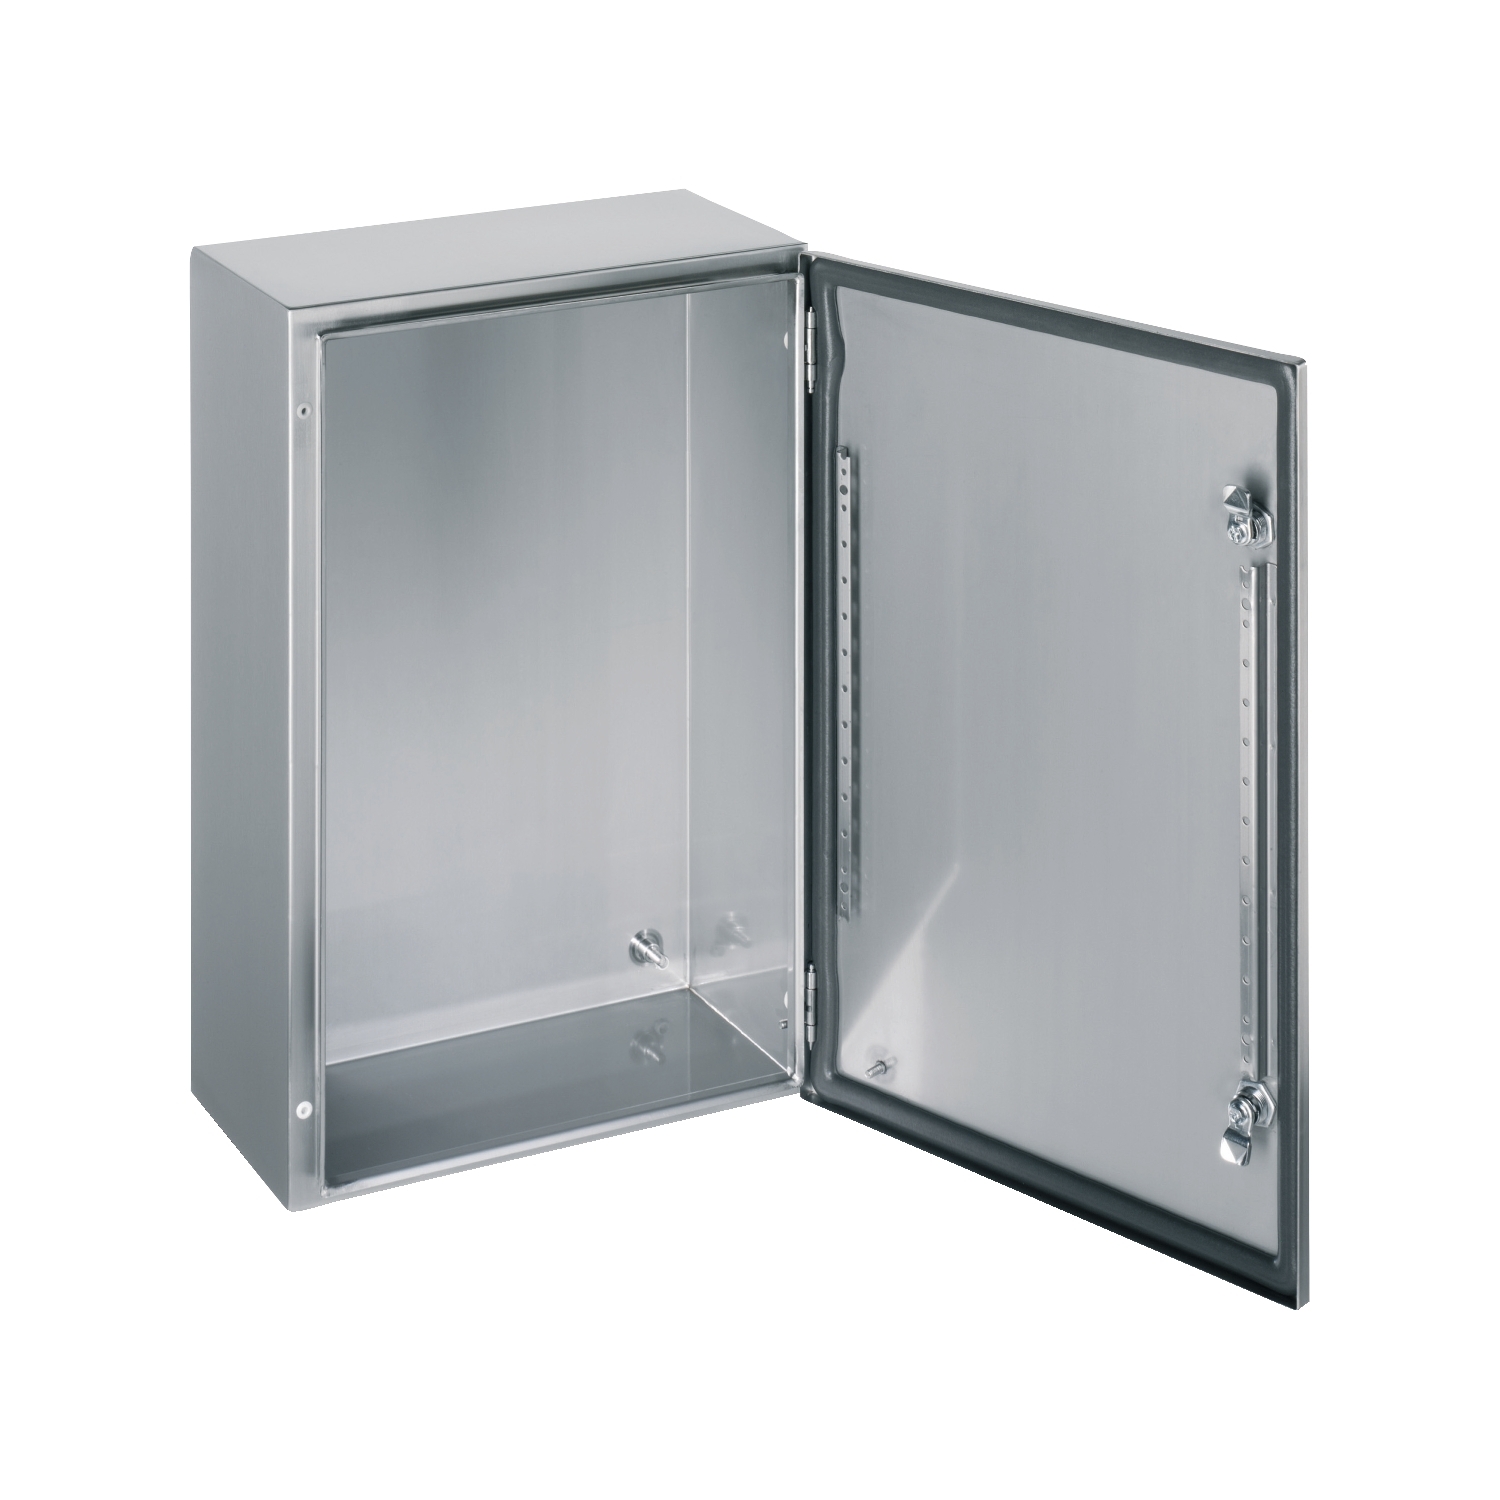 Wall mounted enclosure, Spacial S3X, stainless steel 316L, plain door, 500x400x200mm, IP66